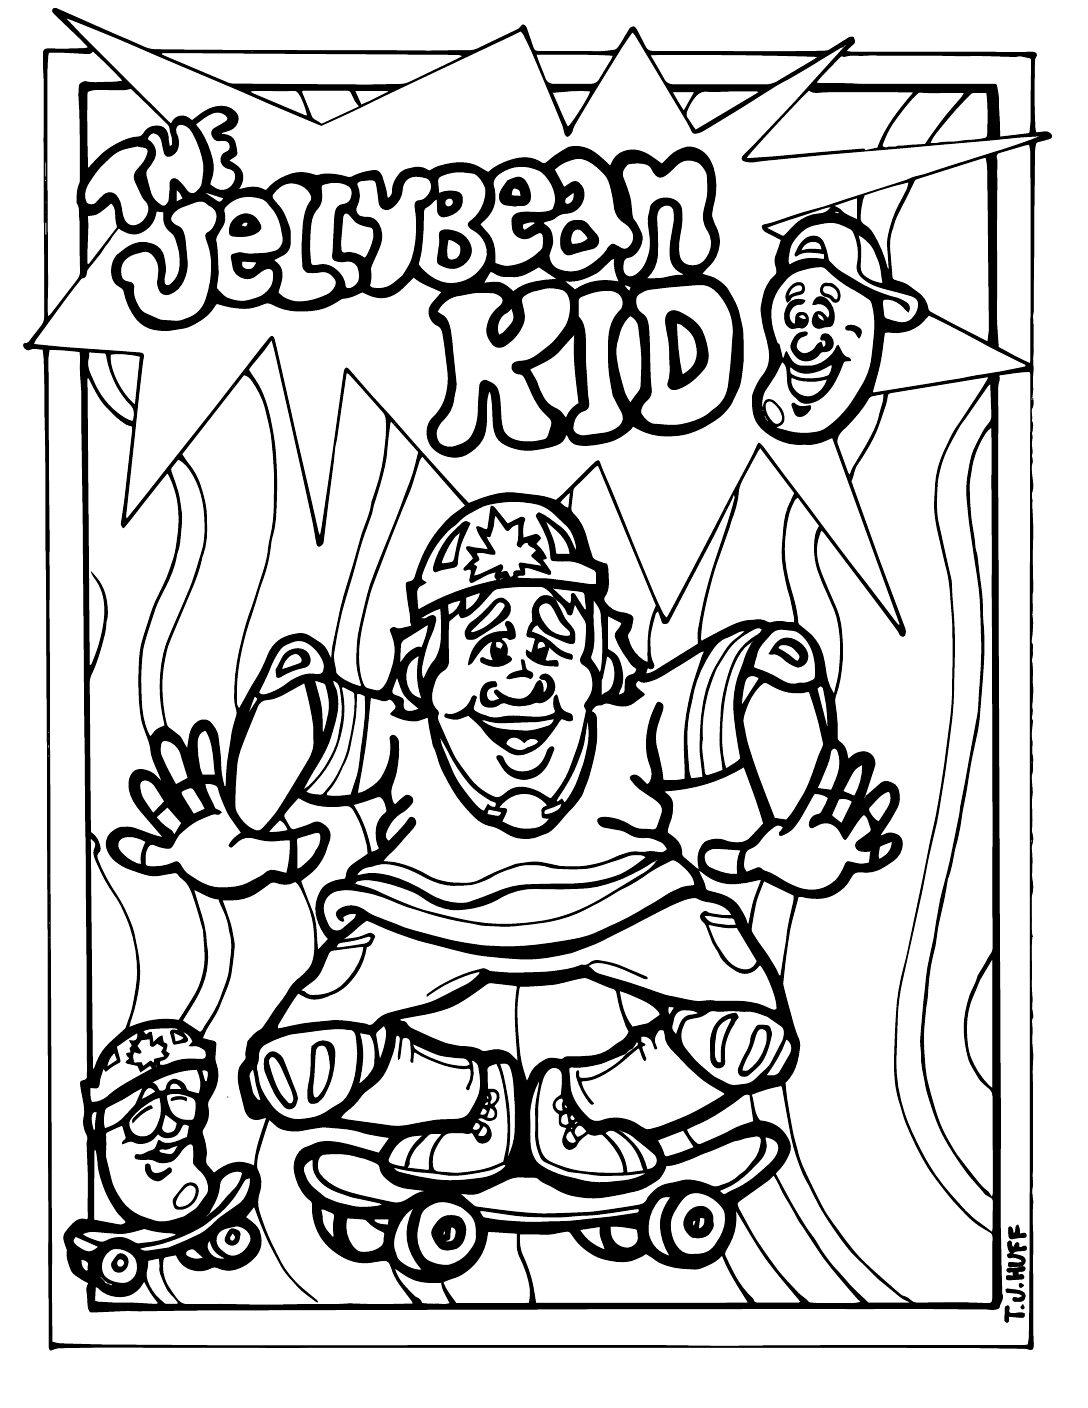 The Jellybean kid colouring pages